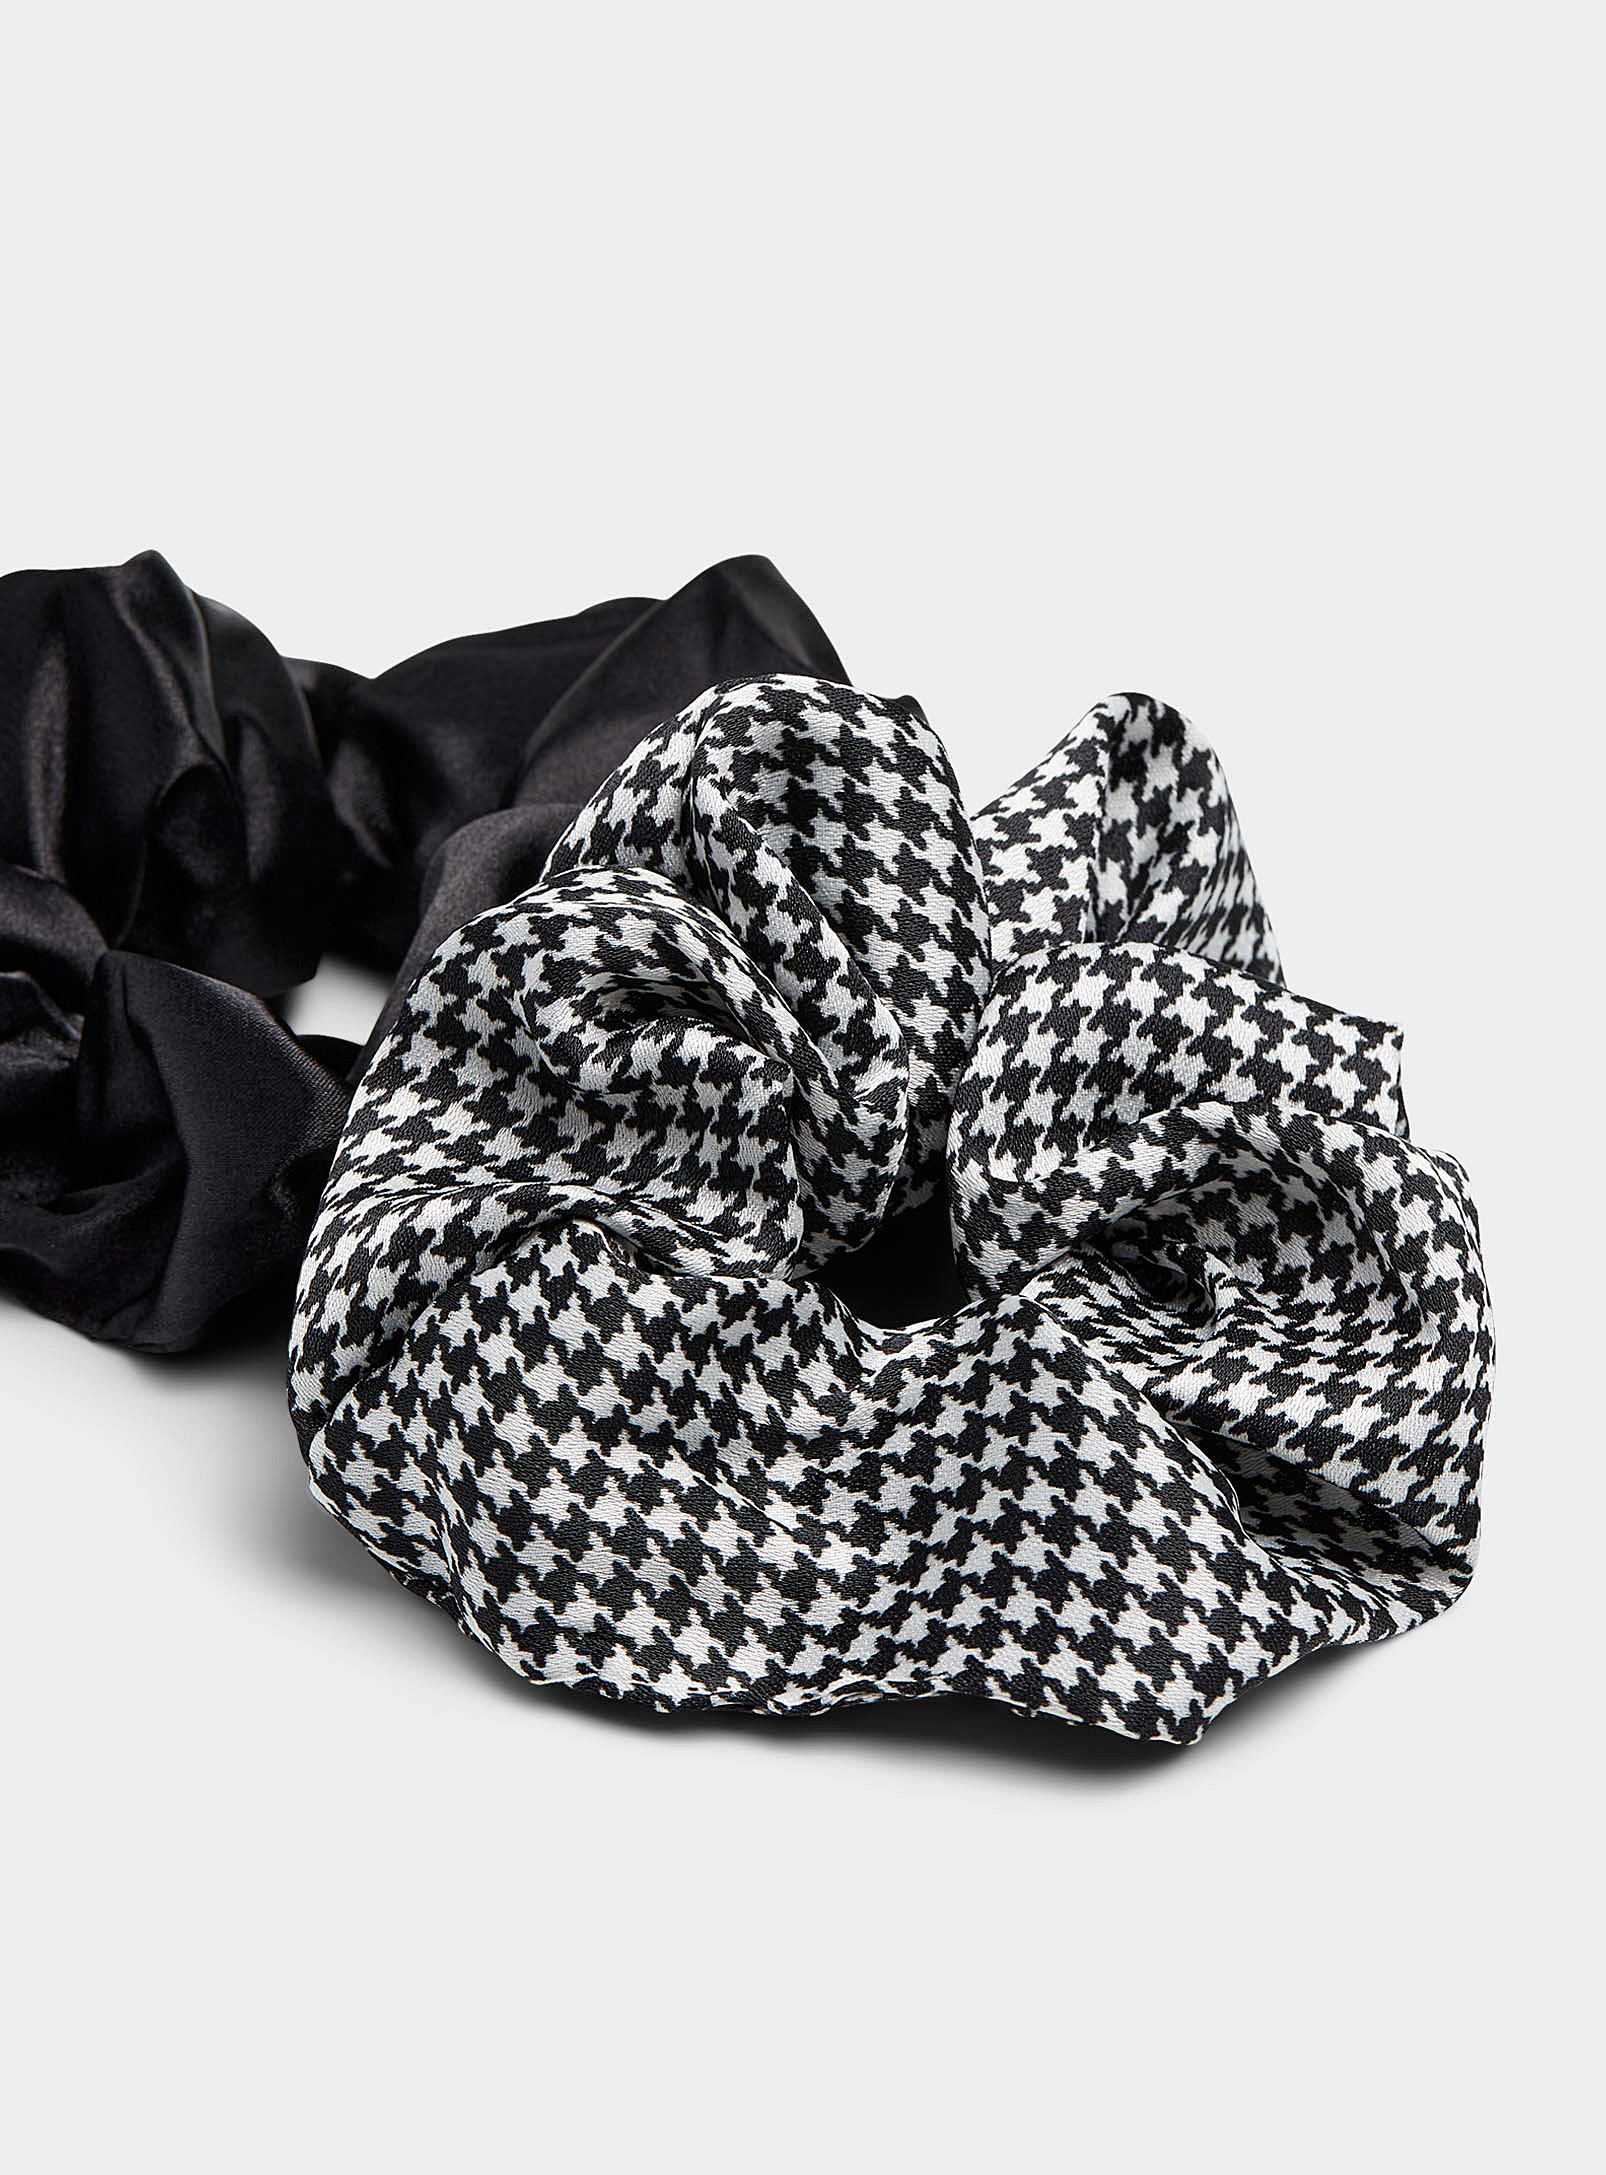 Simons - Women's Houndstooth scrunchies Set of 2